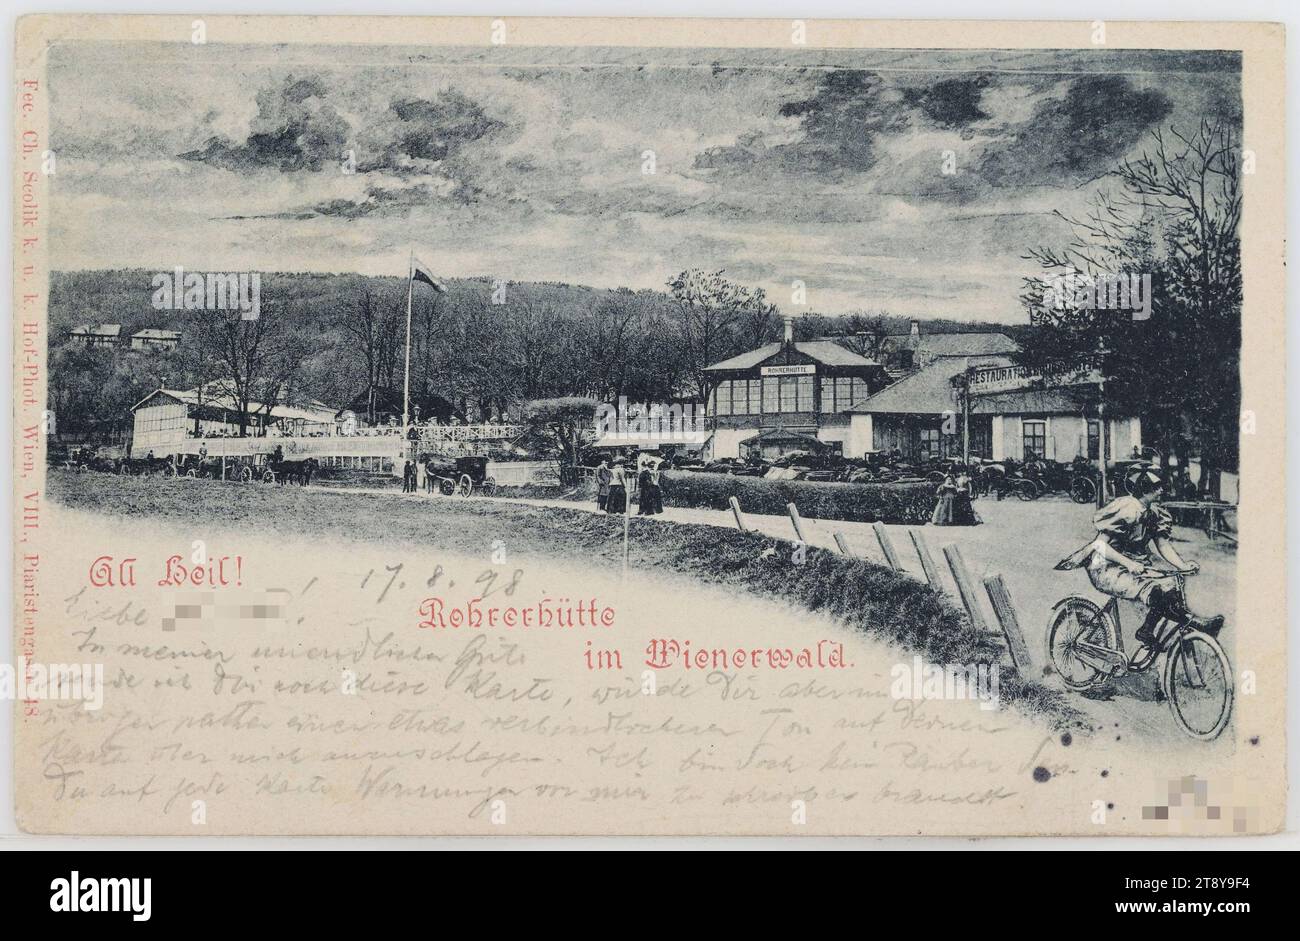 17th, Neuwaldegg - Rohrerhütte, picture postcard, Charles Scolik (1854-1928), photographer, publisher, 1898, cardboard, collotype, inscription, FROM, Vienna, TO, Zinnowitz, Prussia, ADDRESS, Wohlg(eboren), Fräulein, in Zinnowitz, Hotel Eichenhain, Prussia, NACHRICHT, 17. 8.98, Dear    !, In my infinite kindness I am still sending you this card, but for the rest I would like you to strike a somewhat more authoritative tone on your cards about me. After all, I'm not a robber you need to write warnings about me on every card, Wienerwald, recreation and leisure Stock Photo